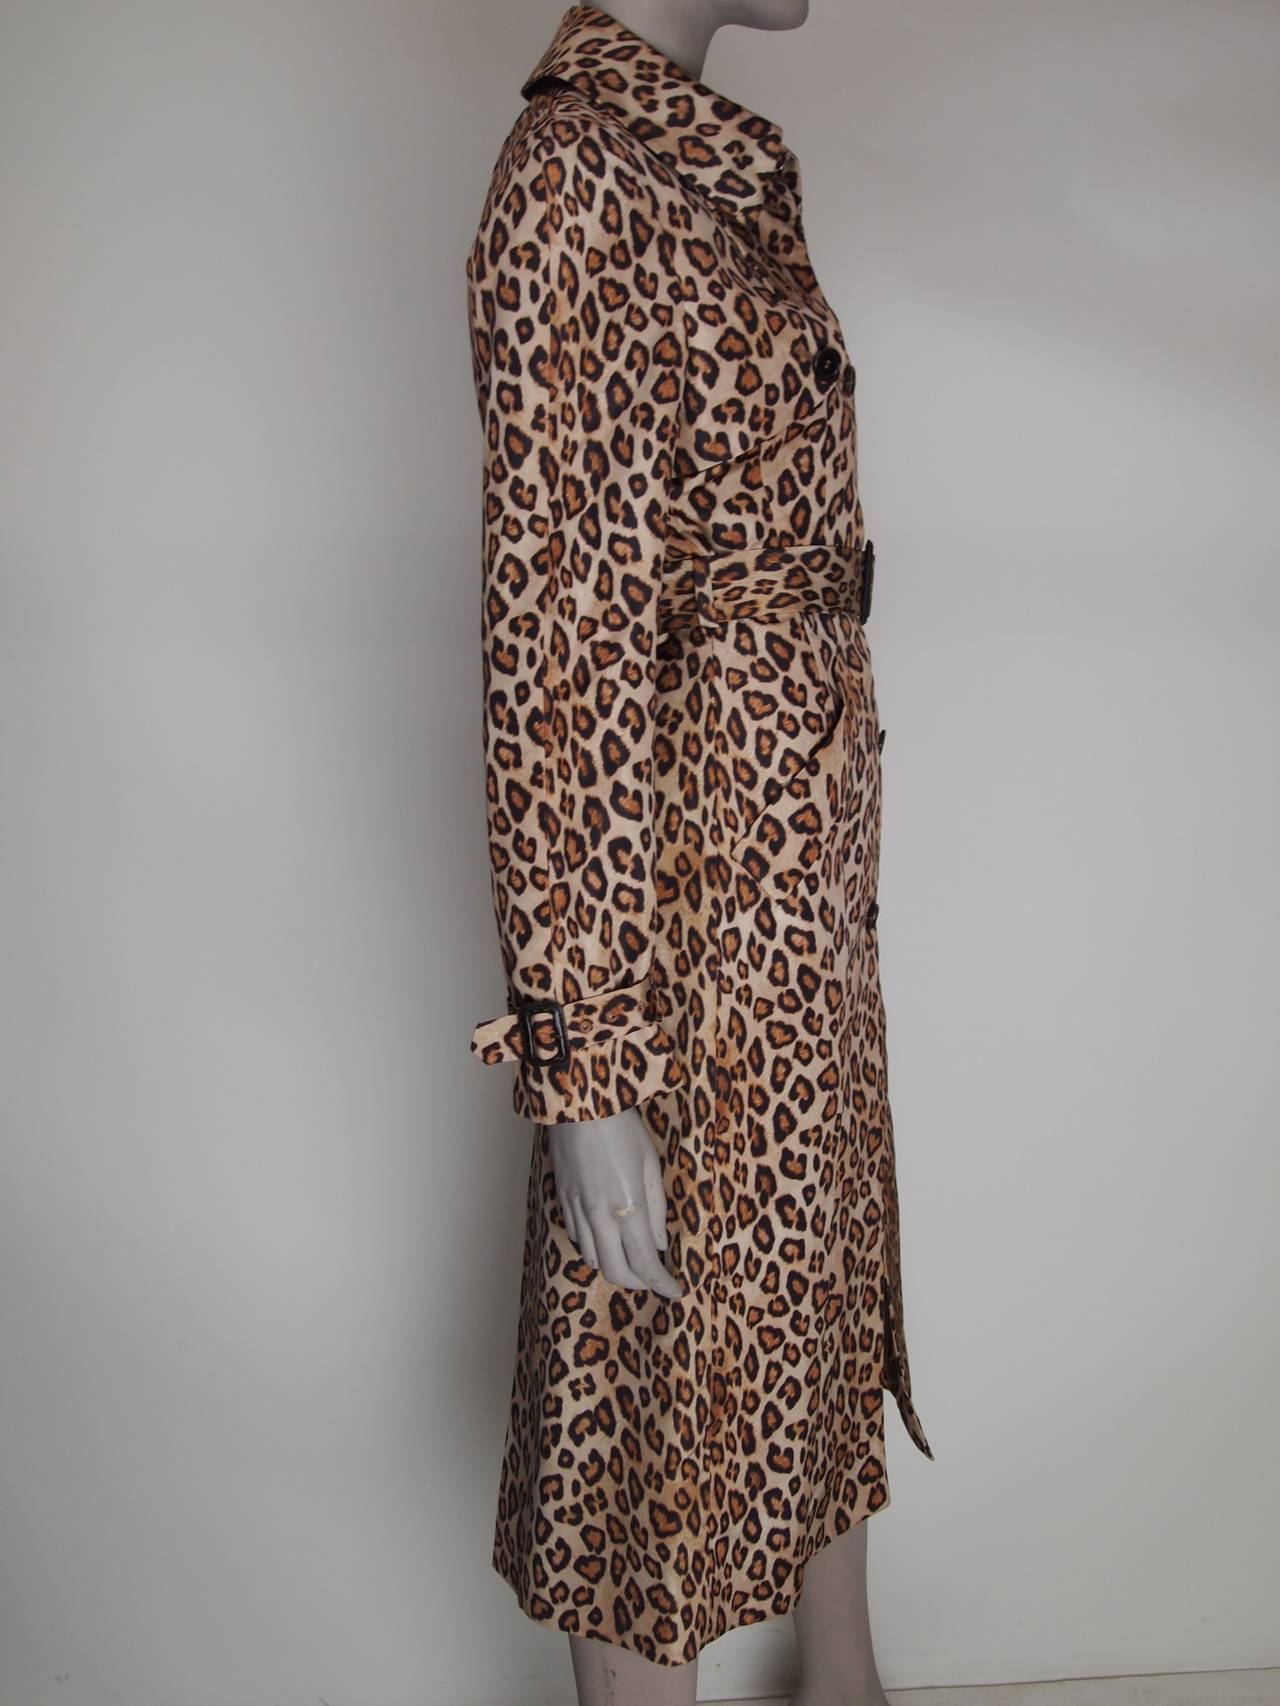 Alexander McQueen leopard print silk trench coat with removable belt, two front pockets, inverted pleat at back and front button closures.